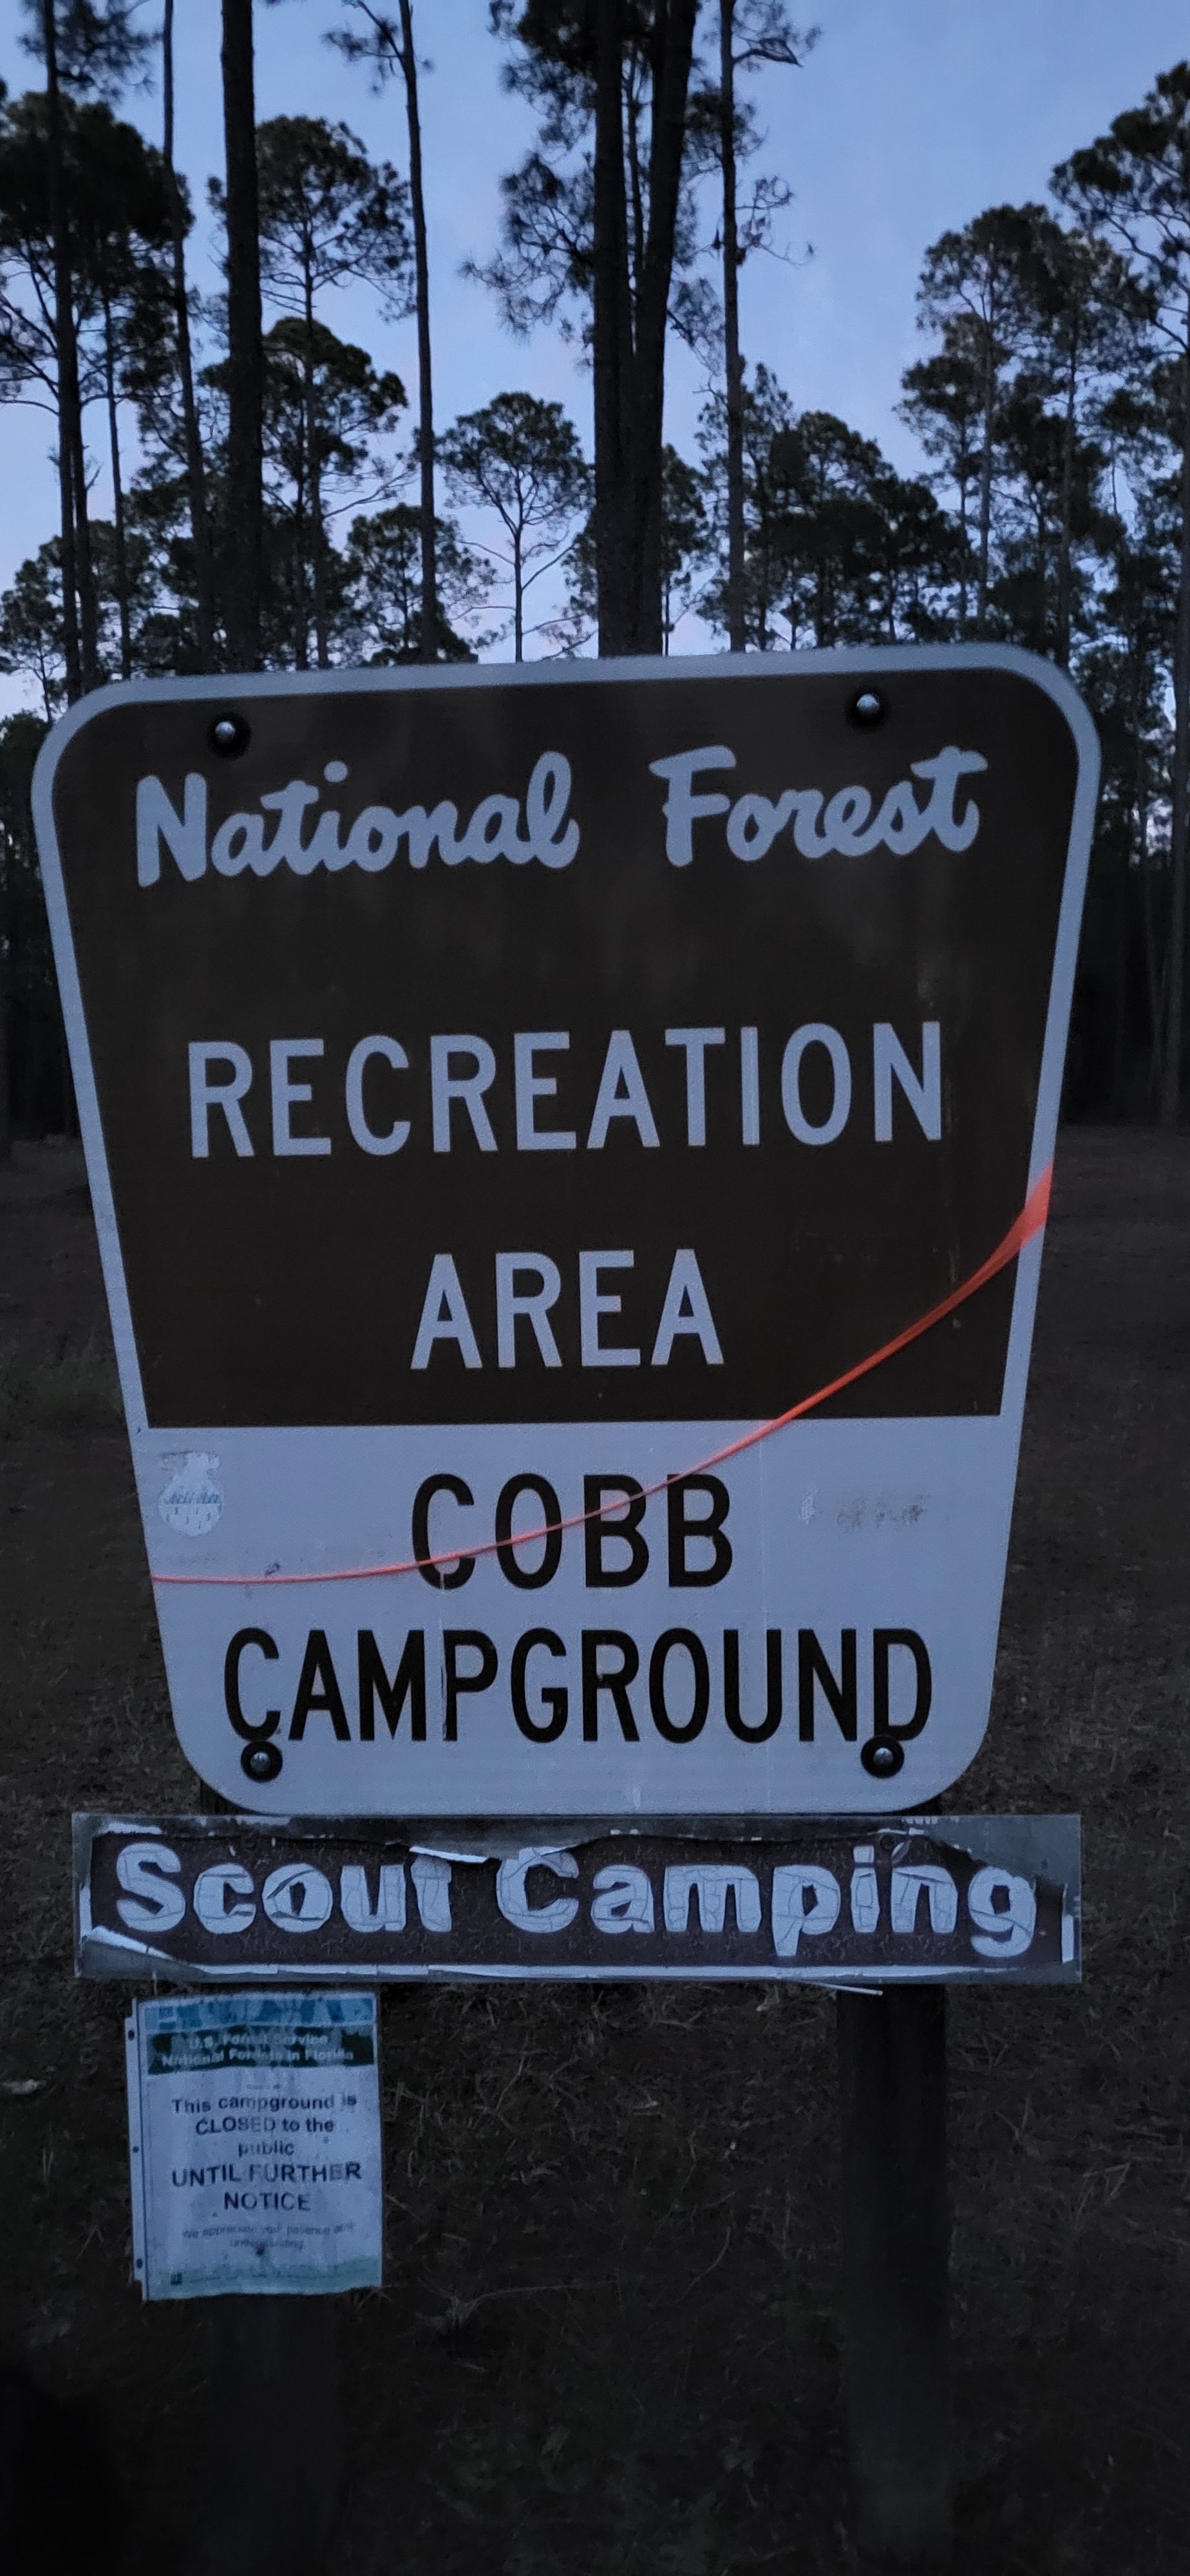 Camper submitted image from Cobb Hunt Camp - 2